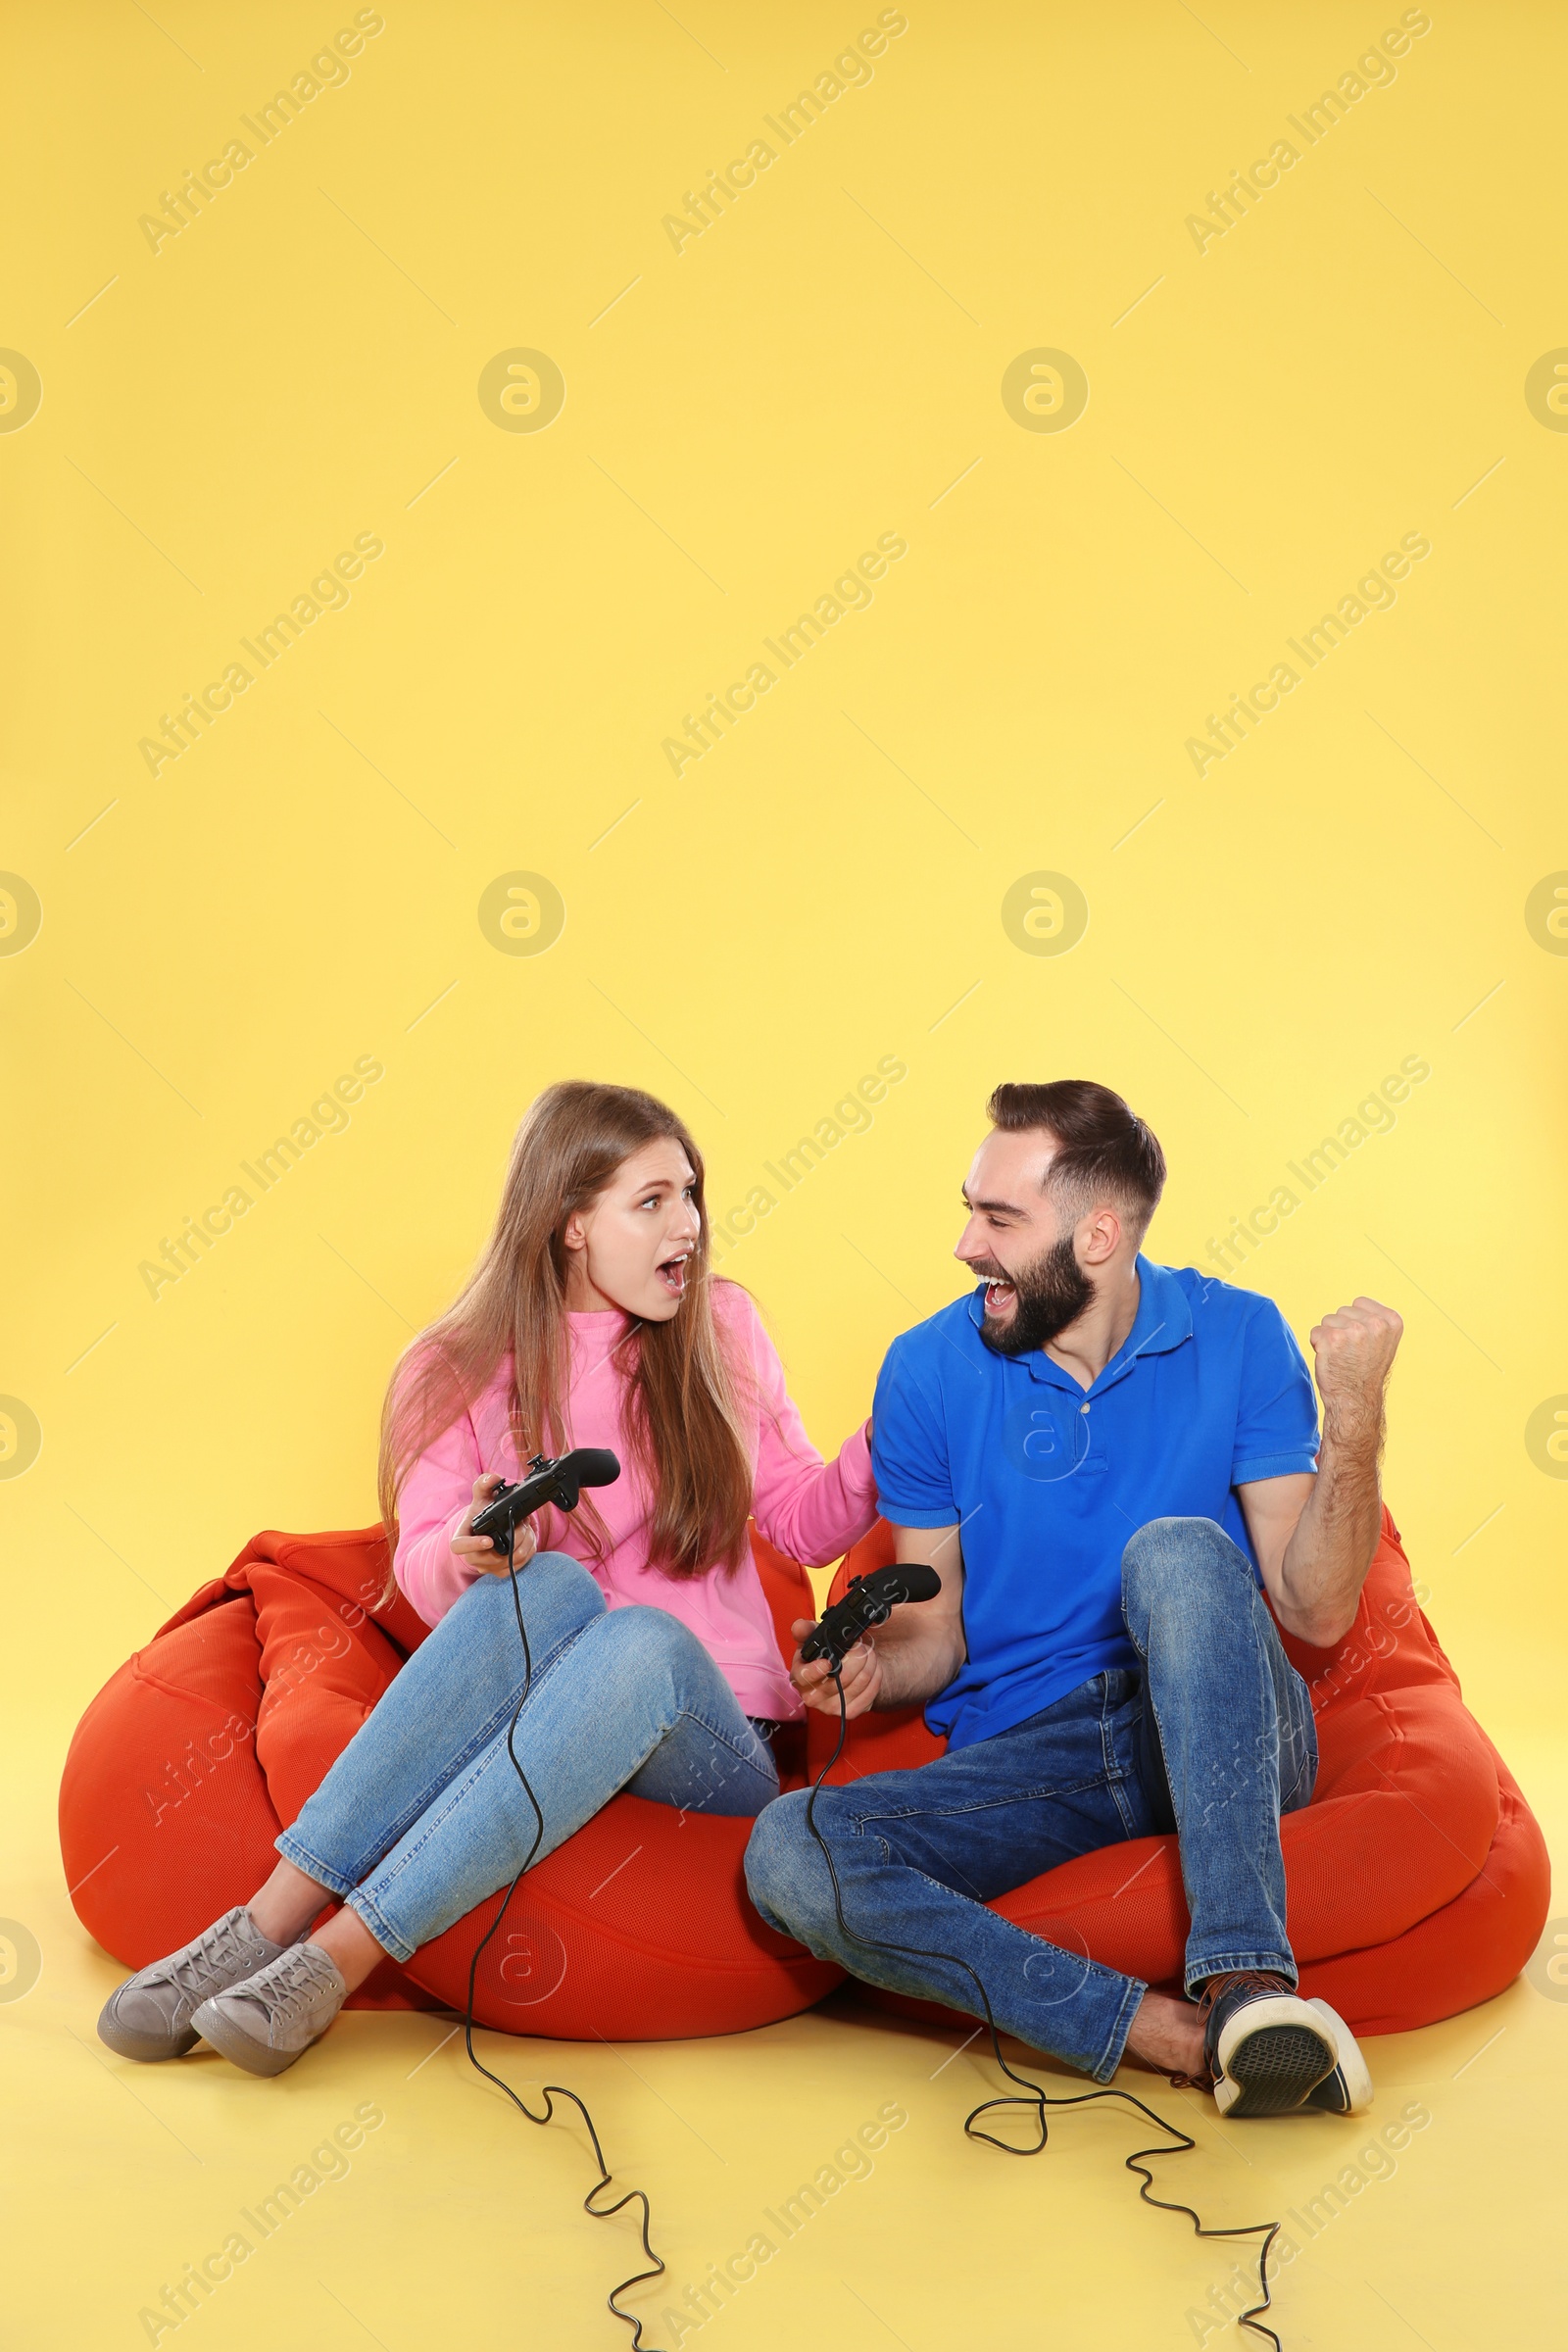 Photo of Emotional couple playing video games with controllers on color background. Space for text